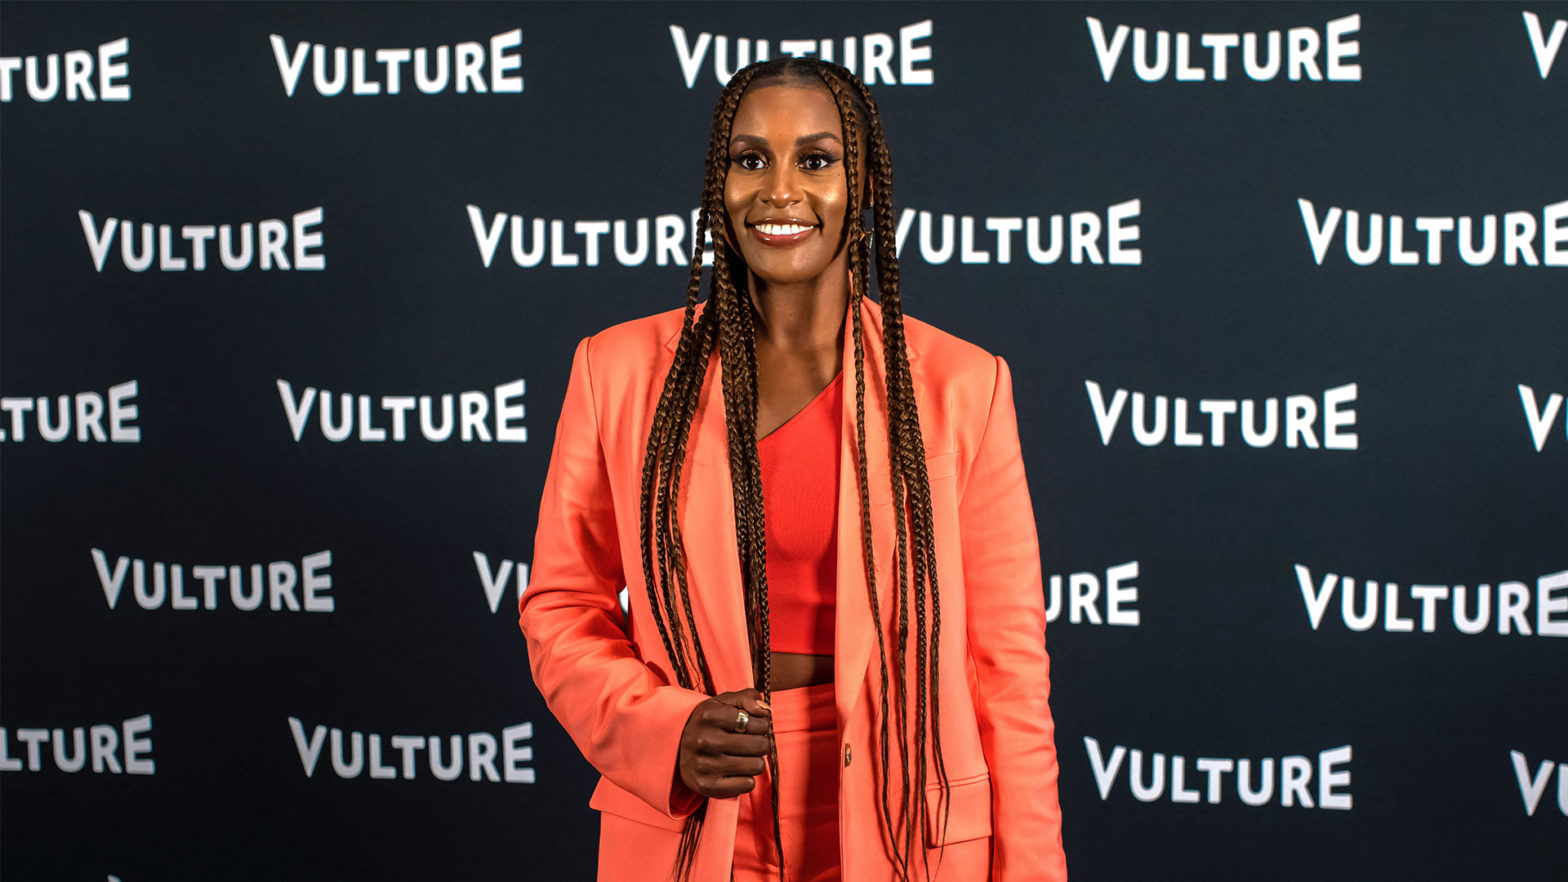 Issa Rae‘s Raedio Label And Google Partner To Support Underrepresented Independent Artists